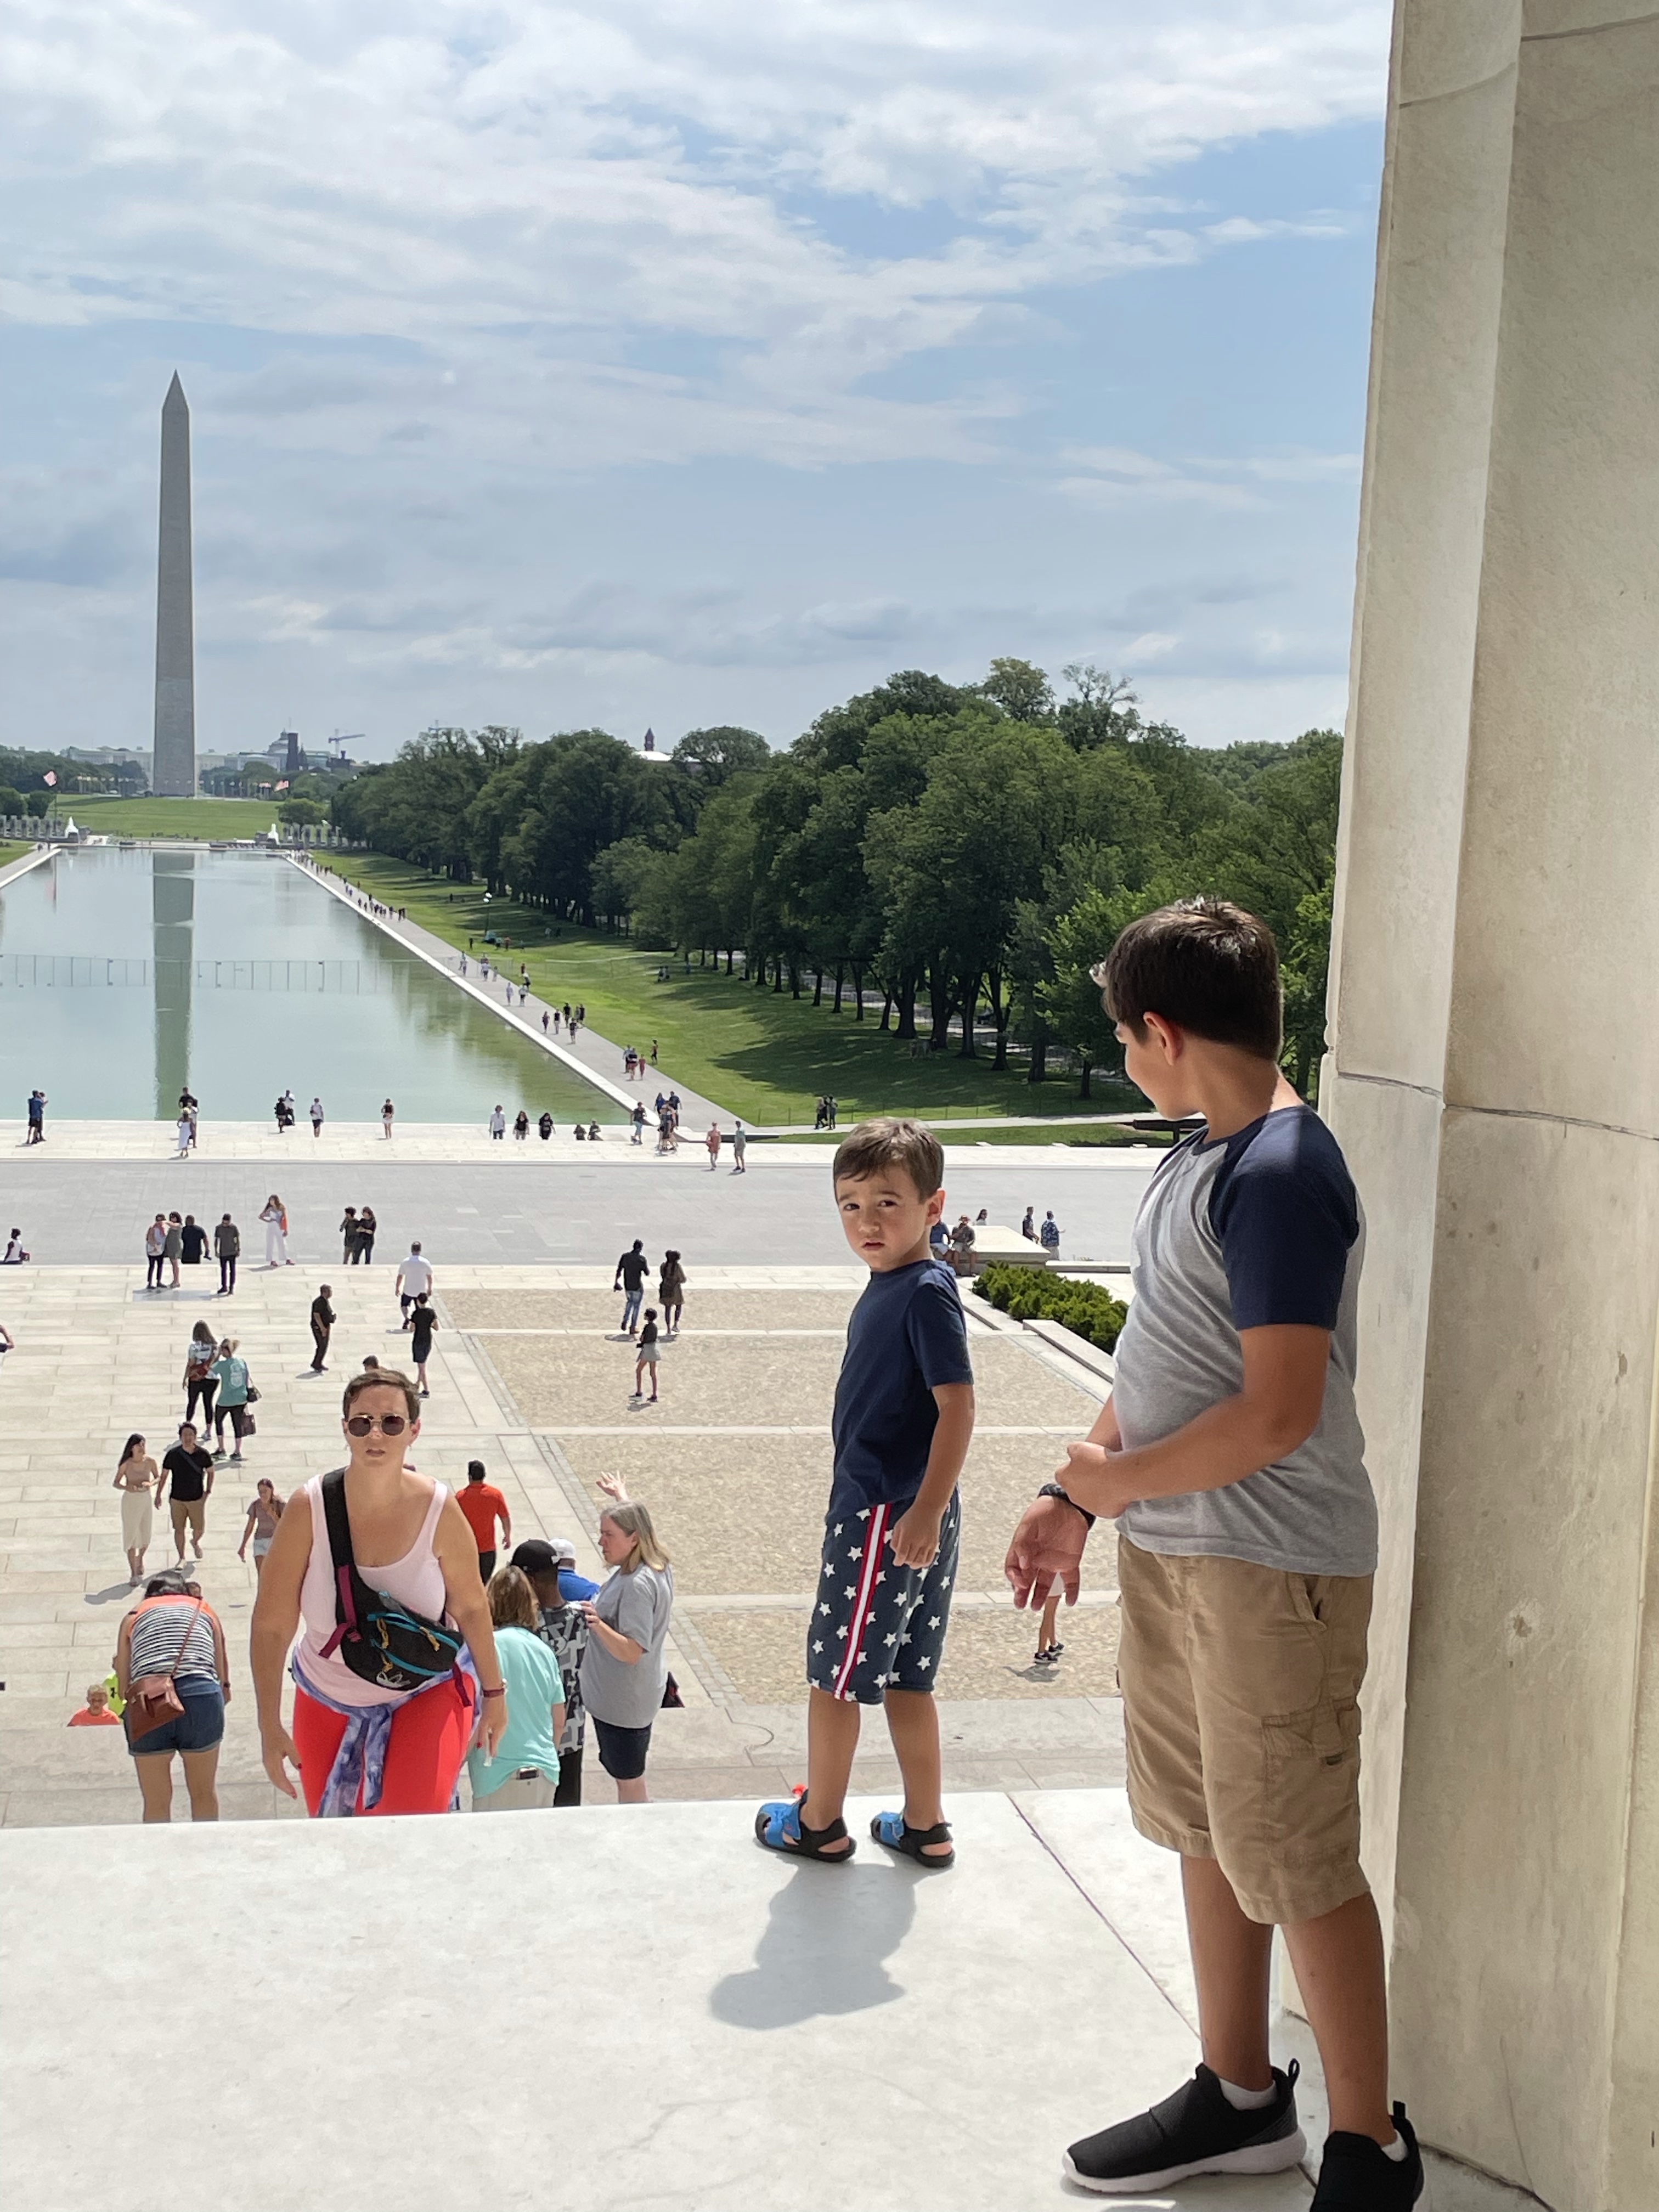 The Best Free things to see in Washington DC in one Day with Kids